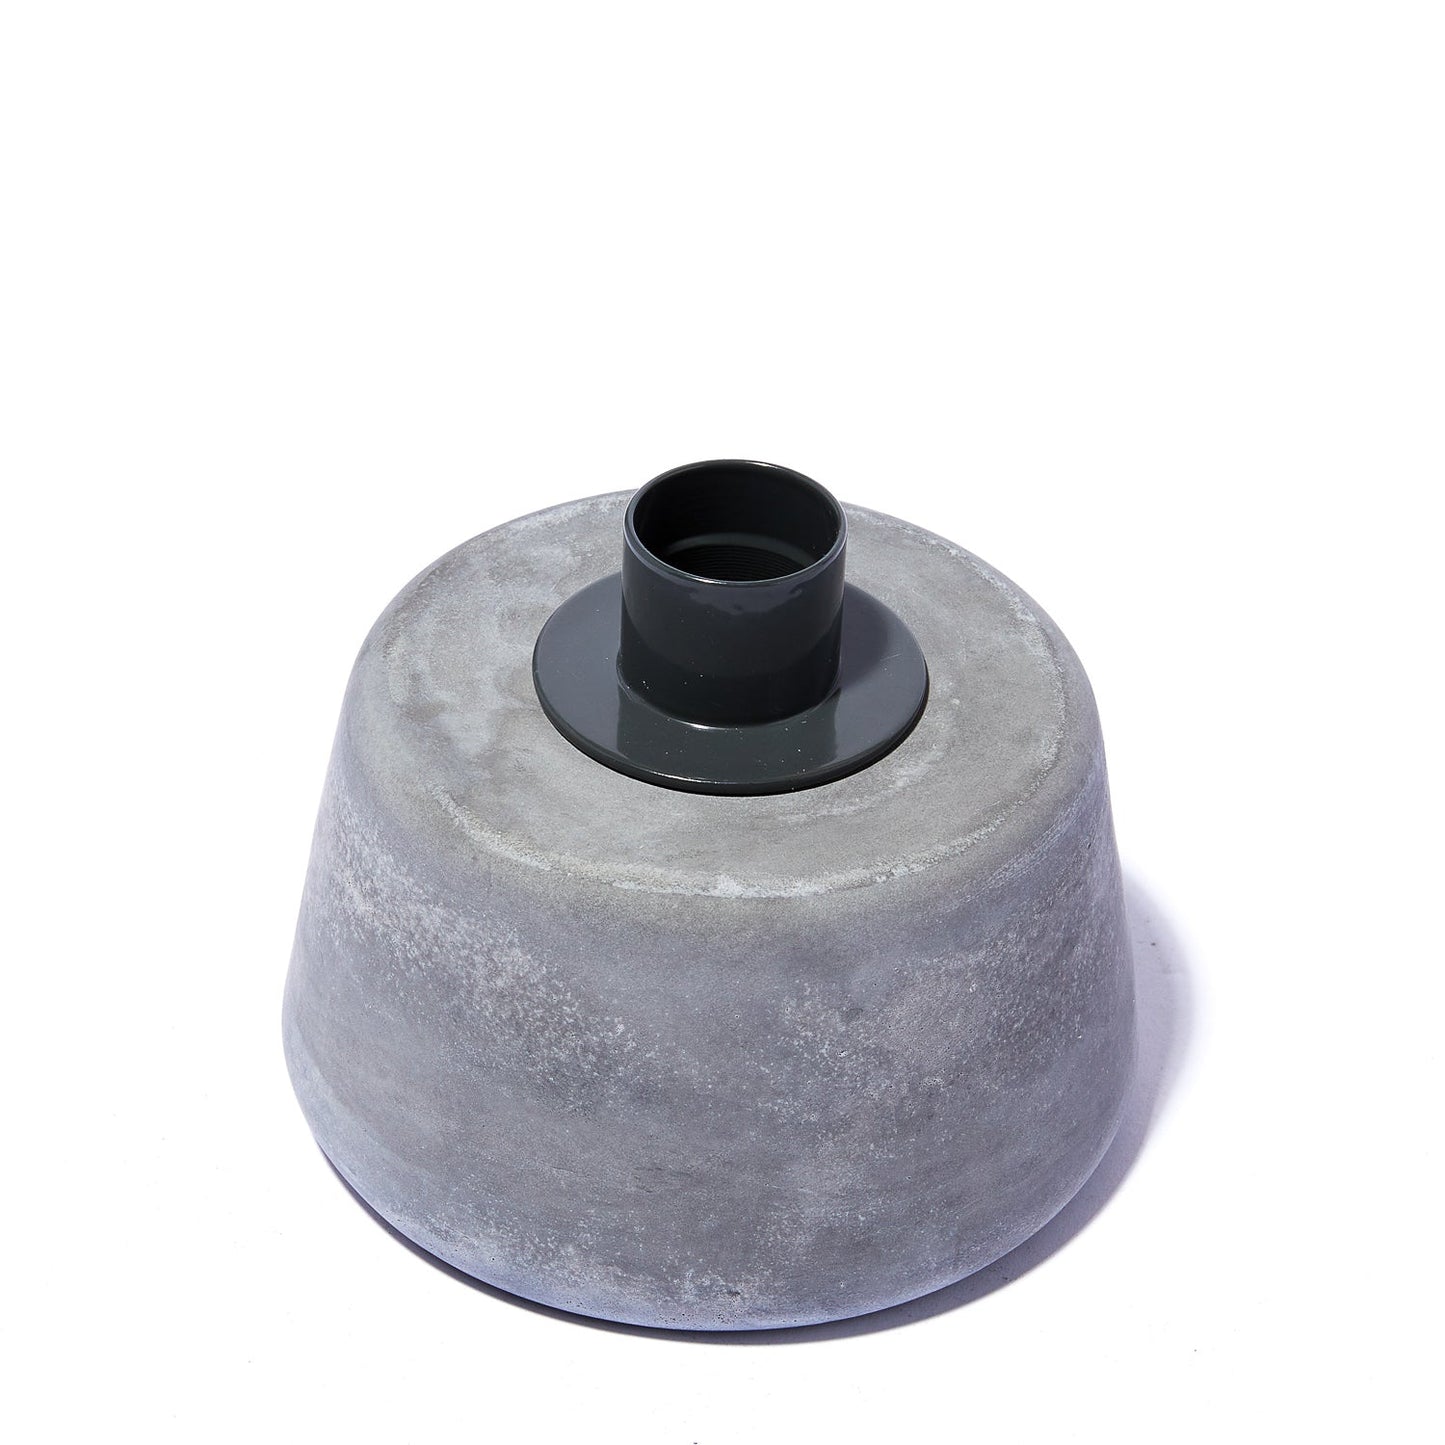 CONE CANDLEHOLDER LOW | GREY